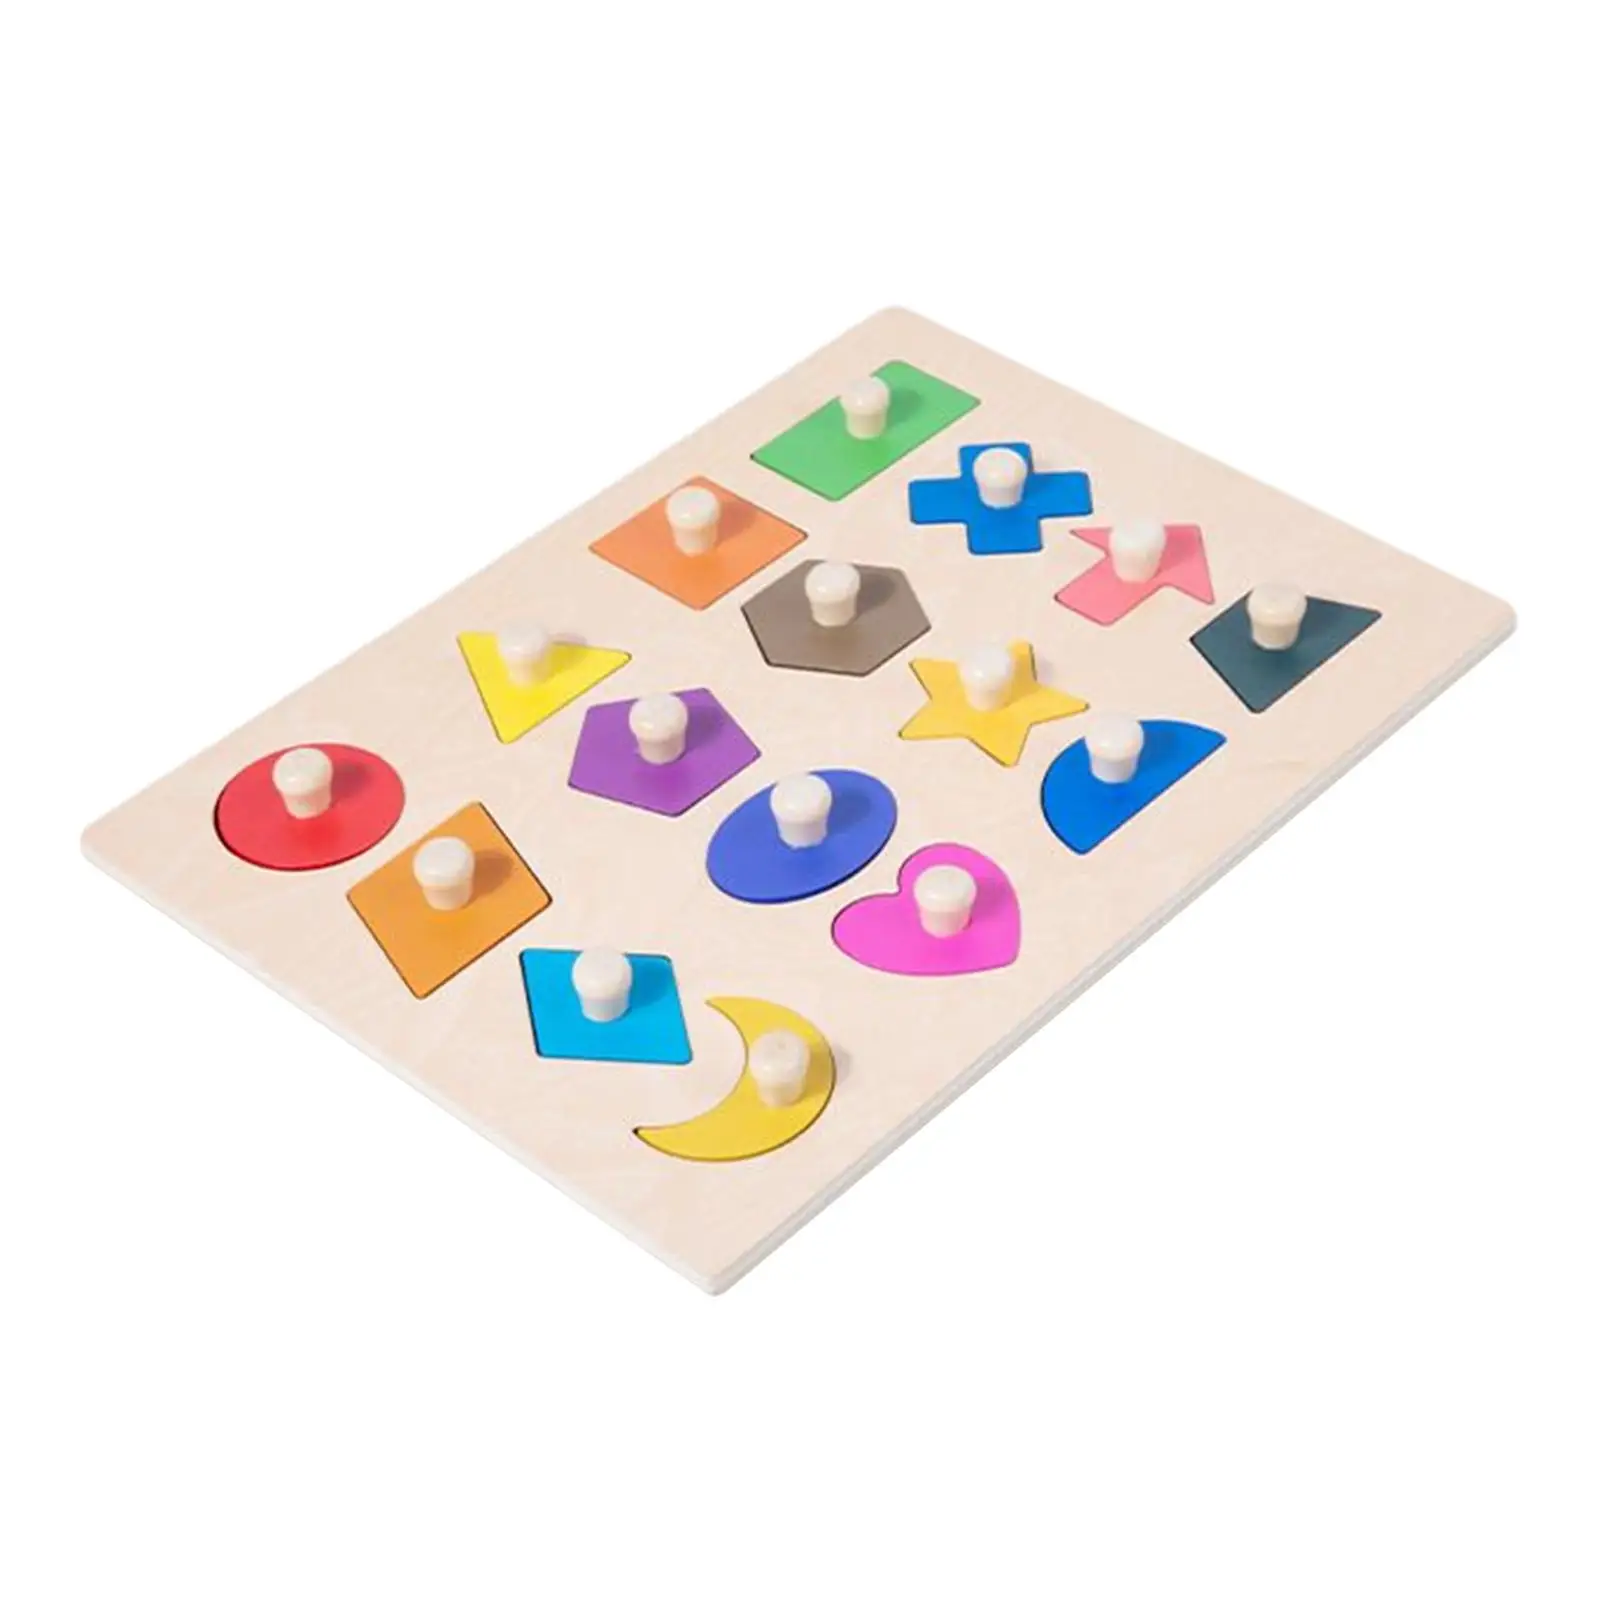 Wooden Sorting Stacking Blocks Shape Color Recognition Geometric Stacker Game Learning Shape Matching puzzles for Preschool